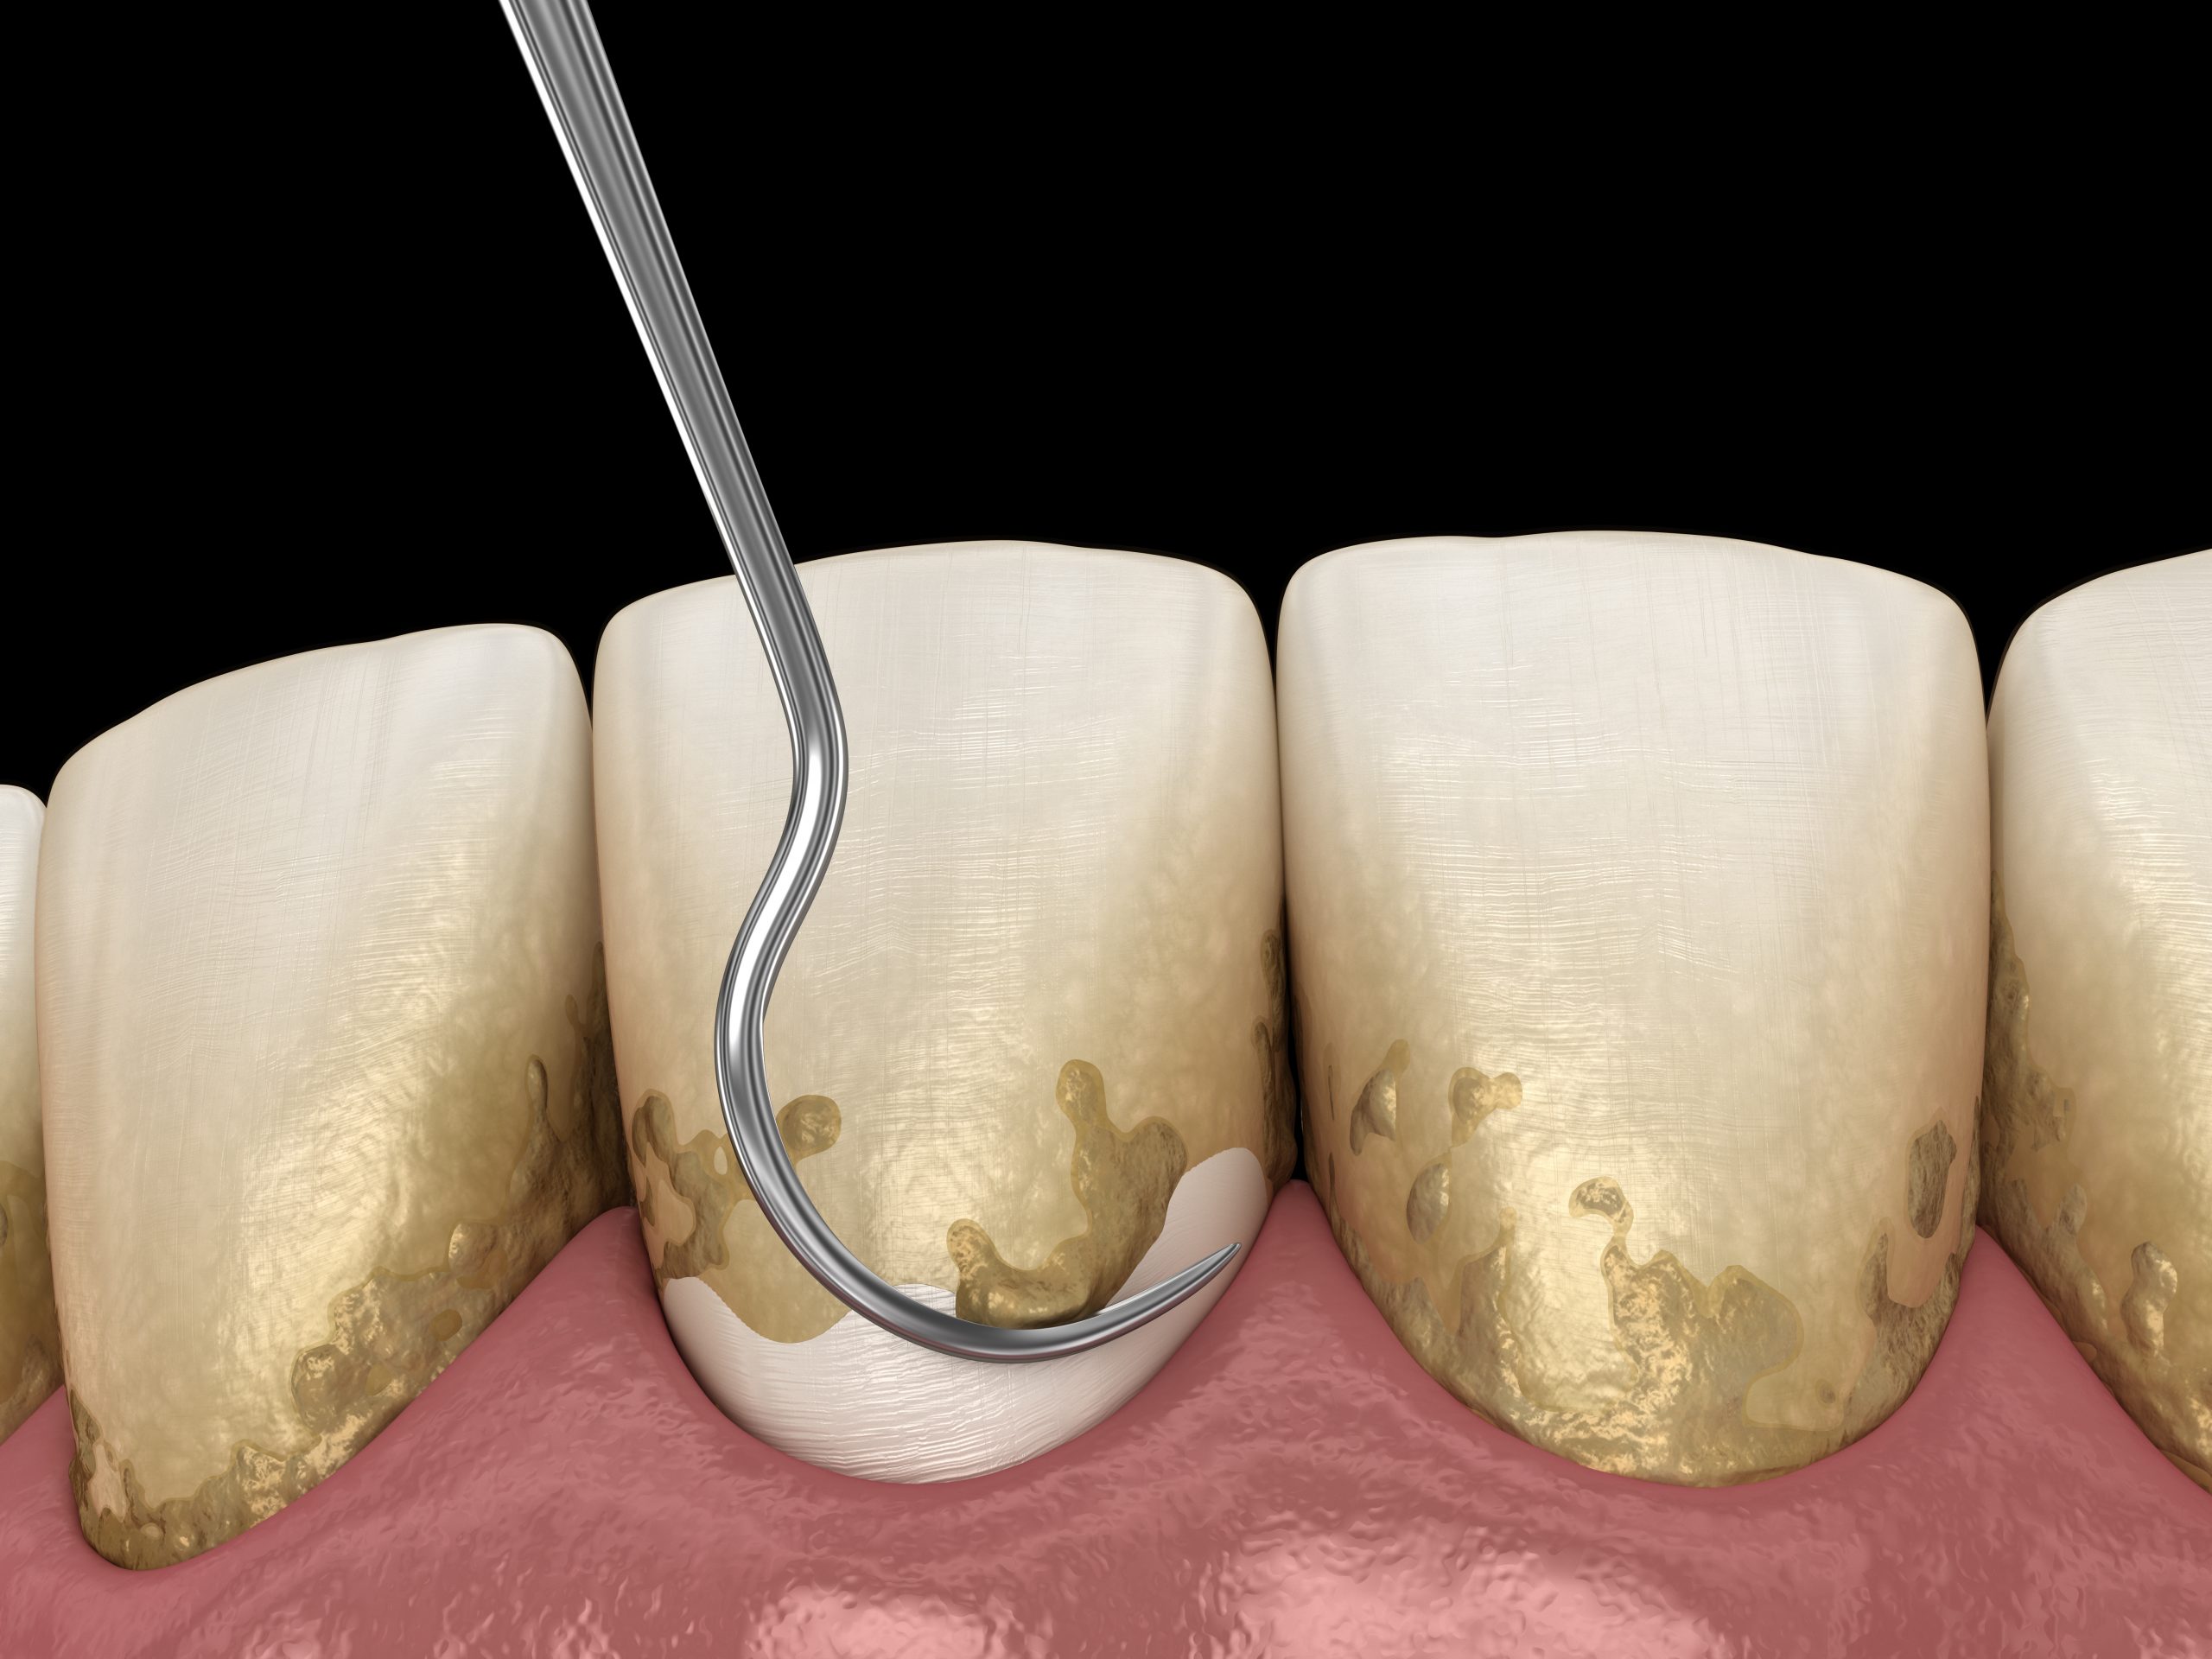 Phases of Periodontal Therapy in Coconut Grove